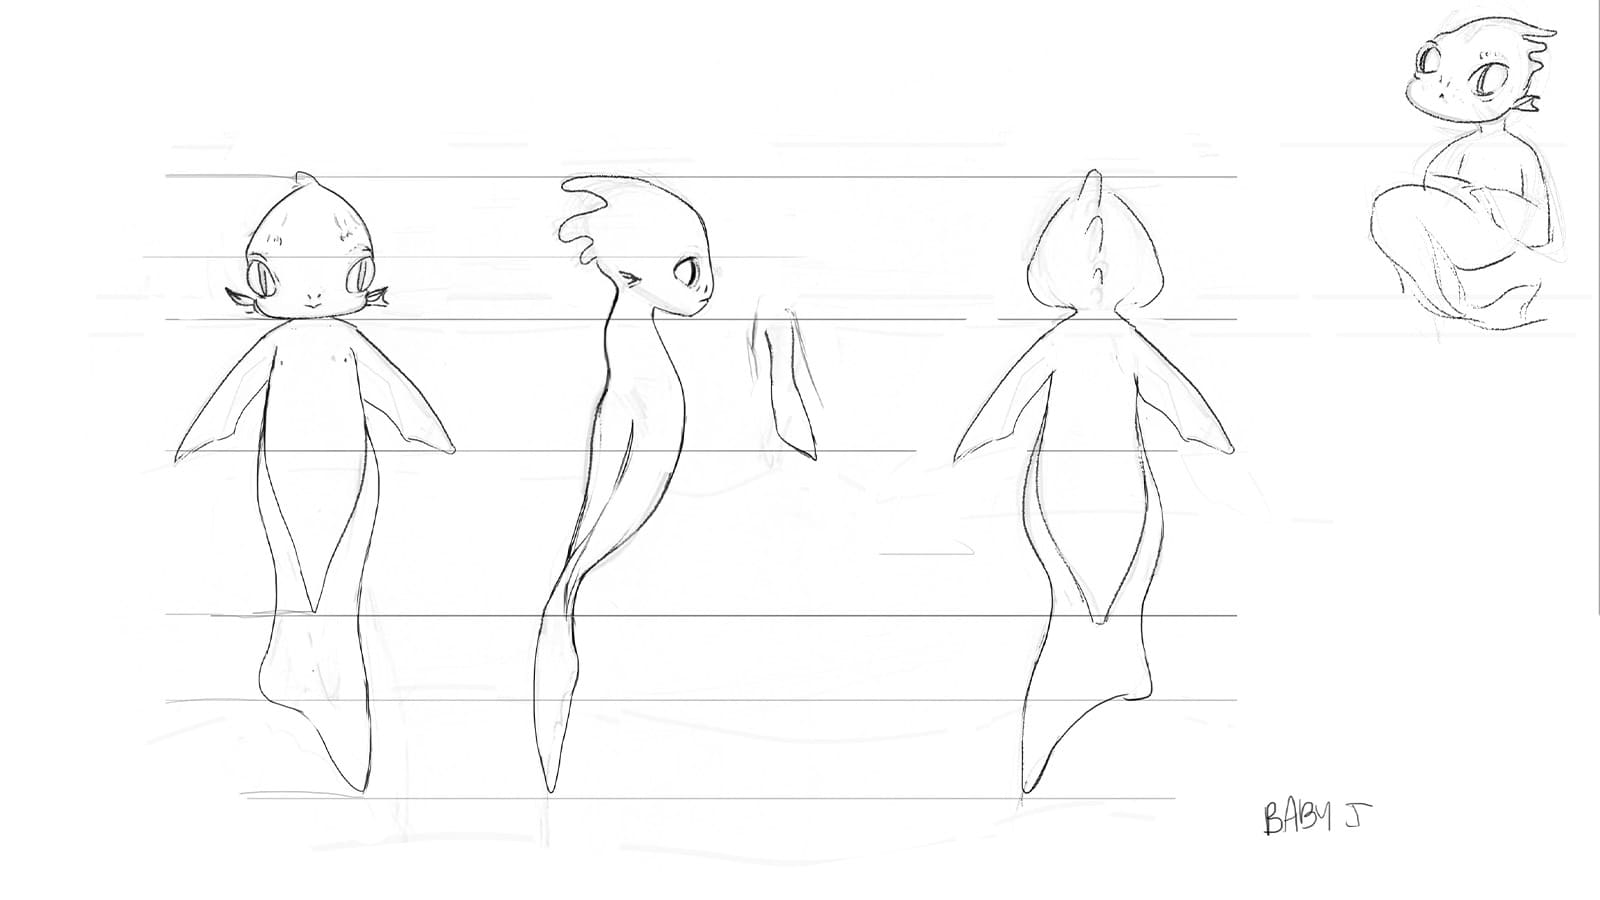 A turnaround of the baby monster